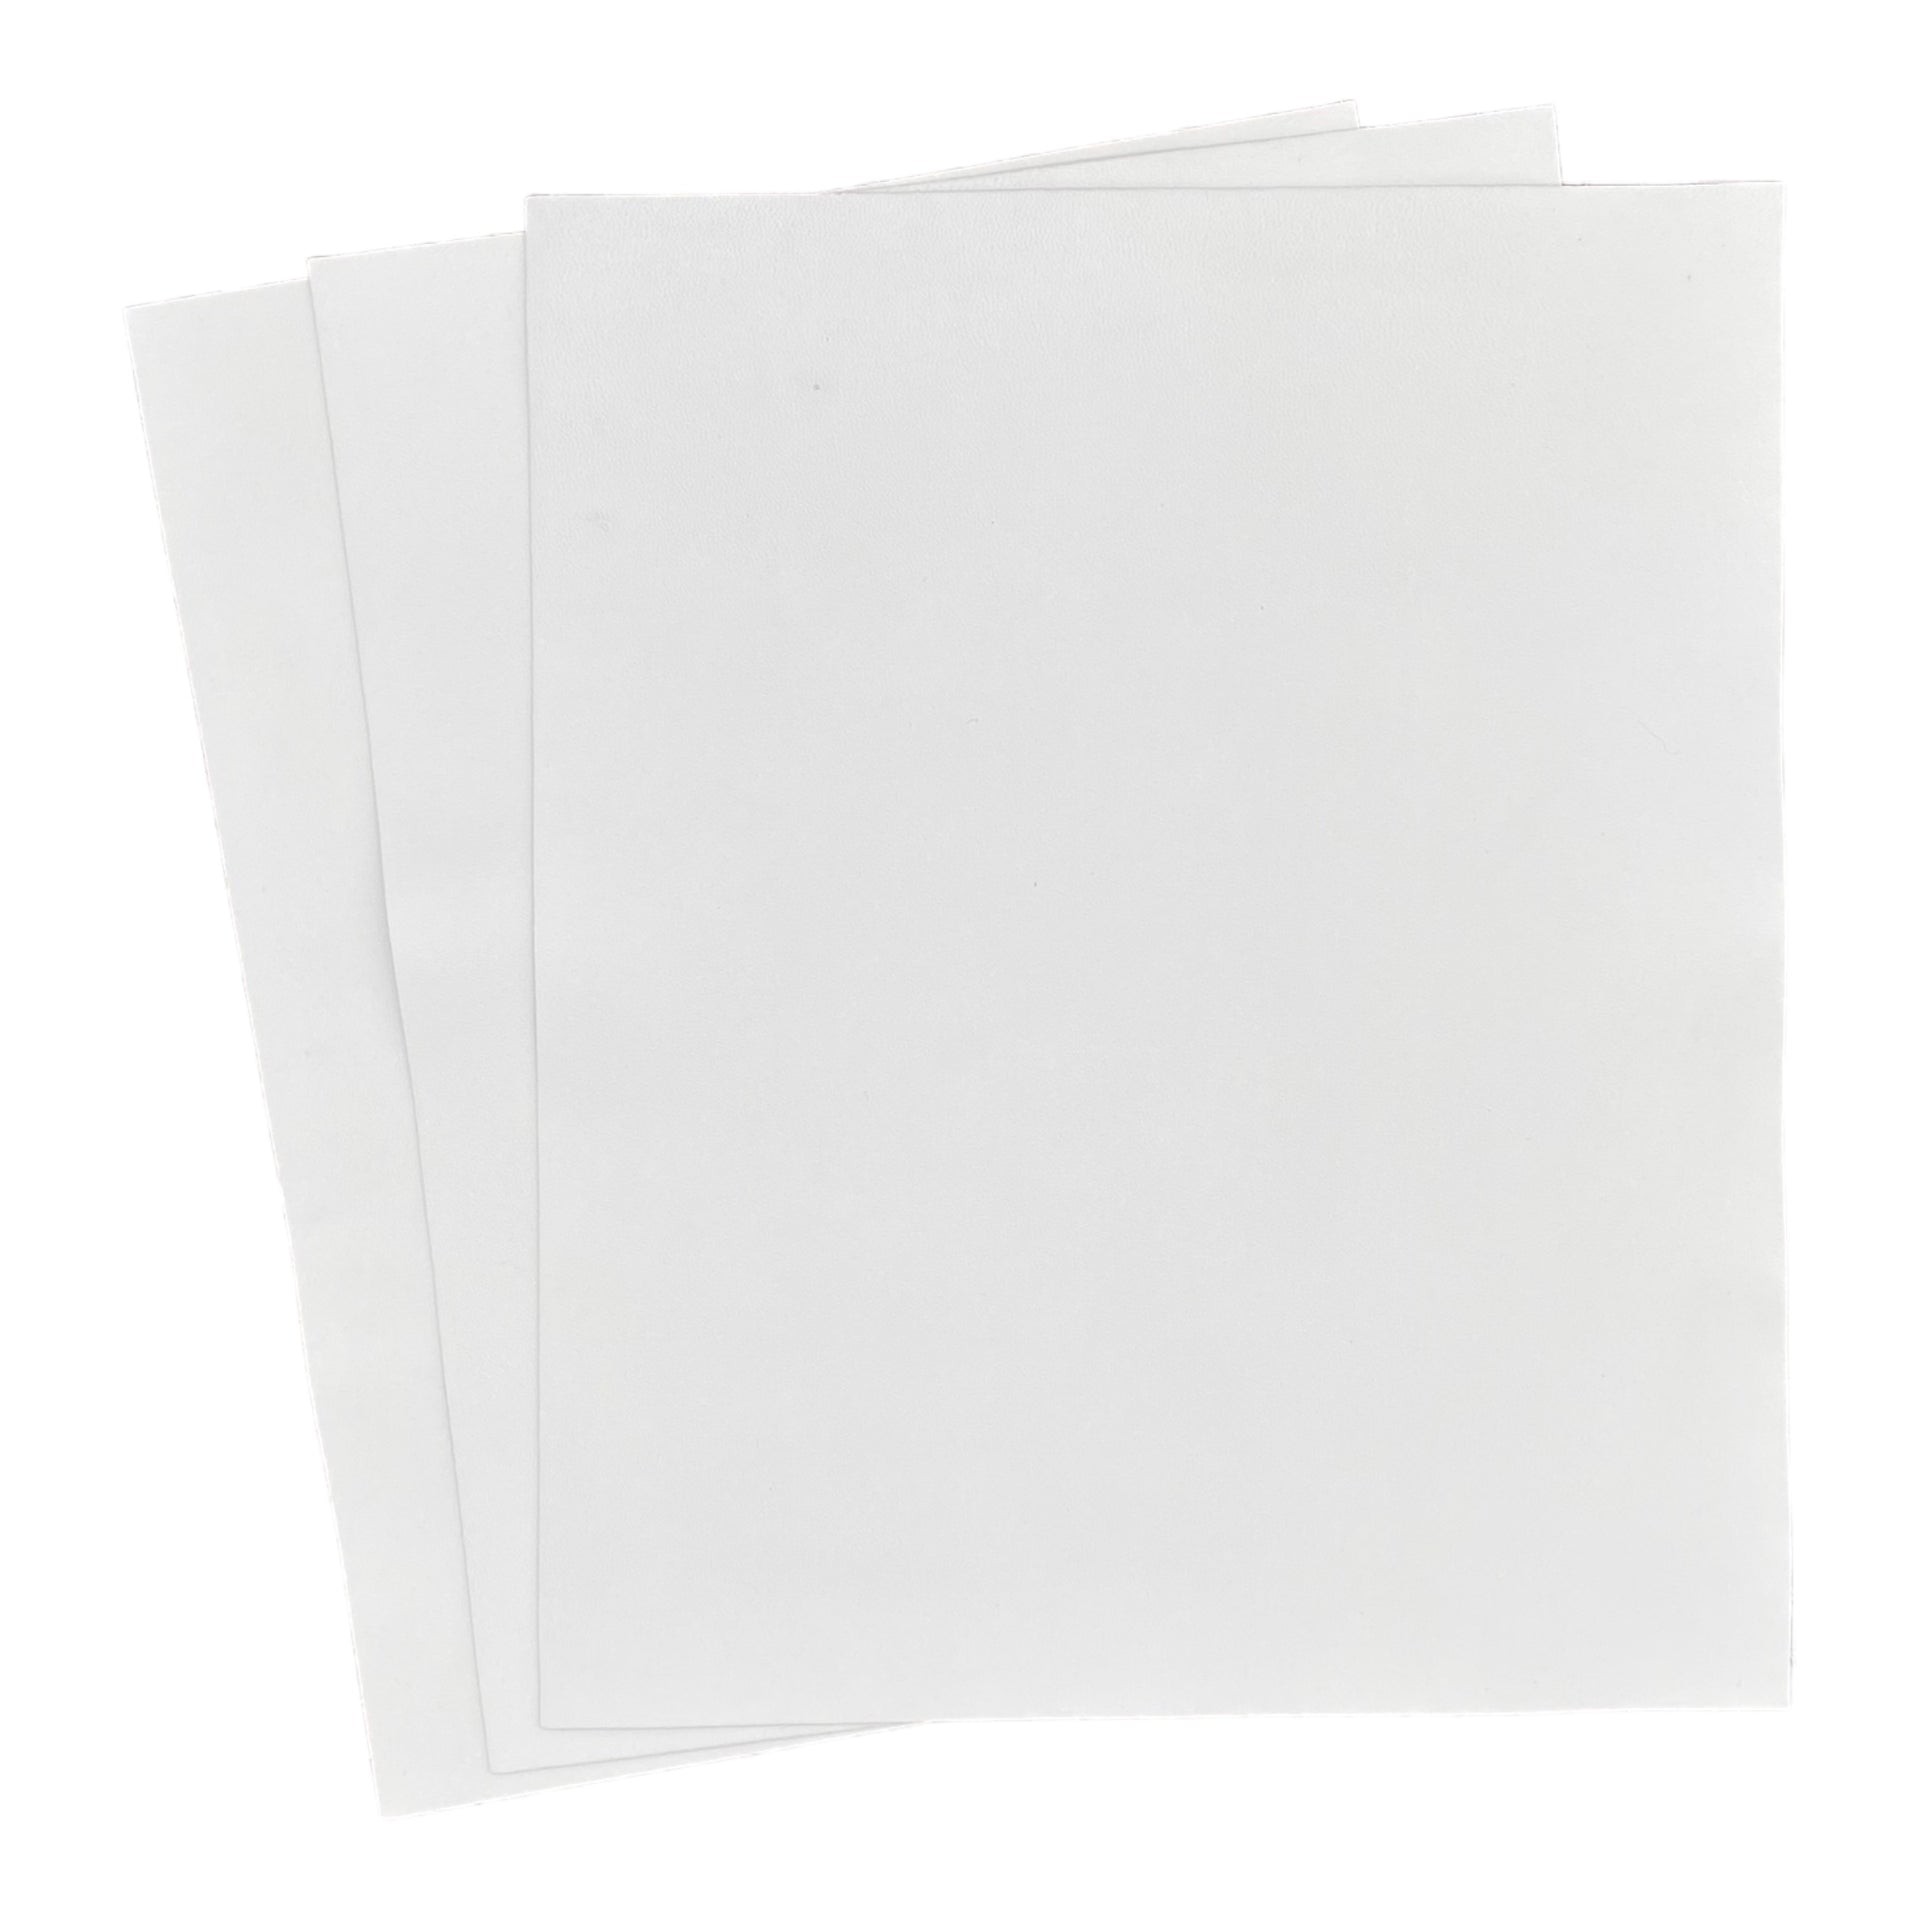 Leatherific Transfer Paper and White Lamb Leather Bundle 8 1/2 By 11